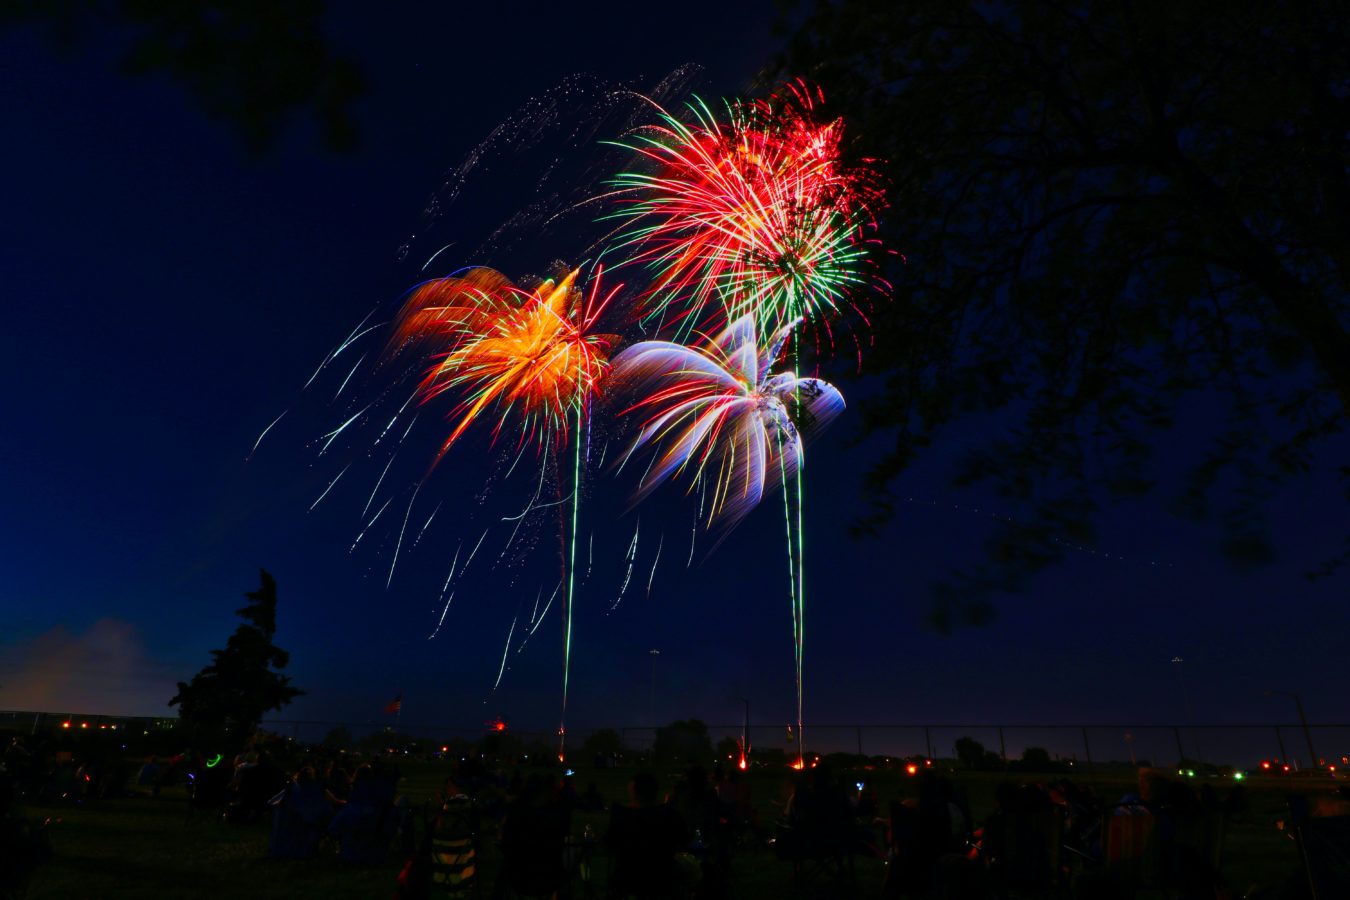 assorted-color fireworks display during night time